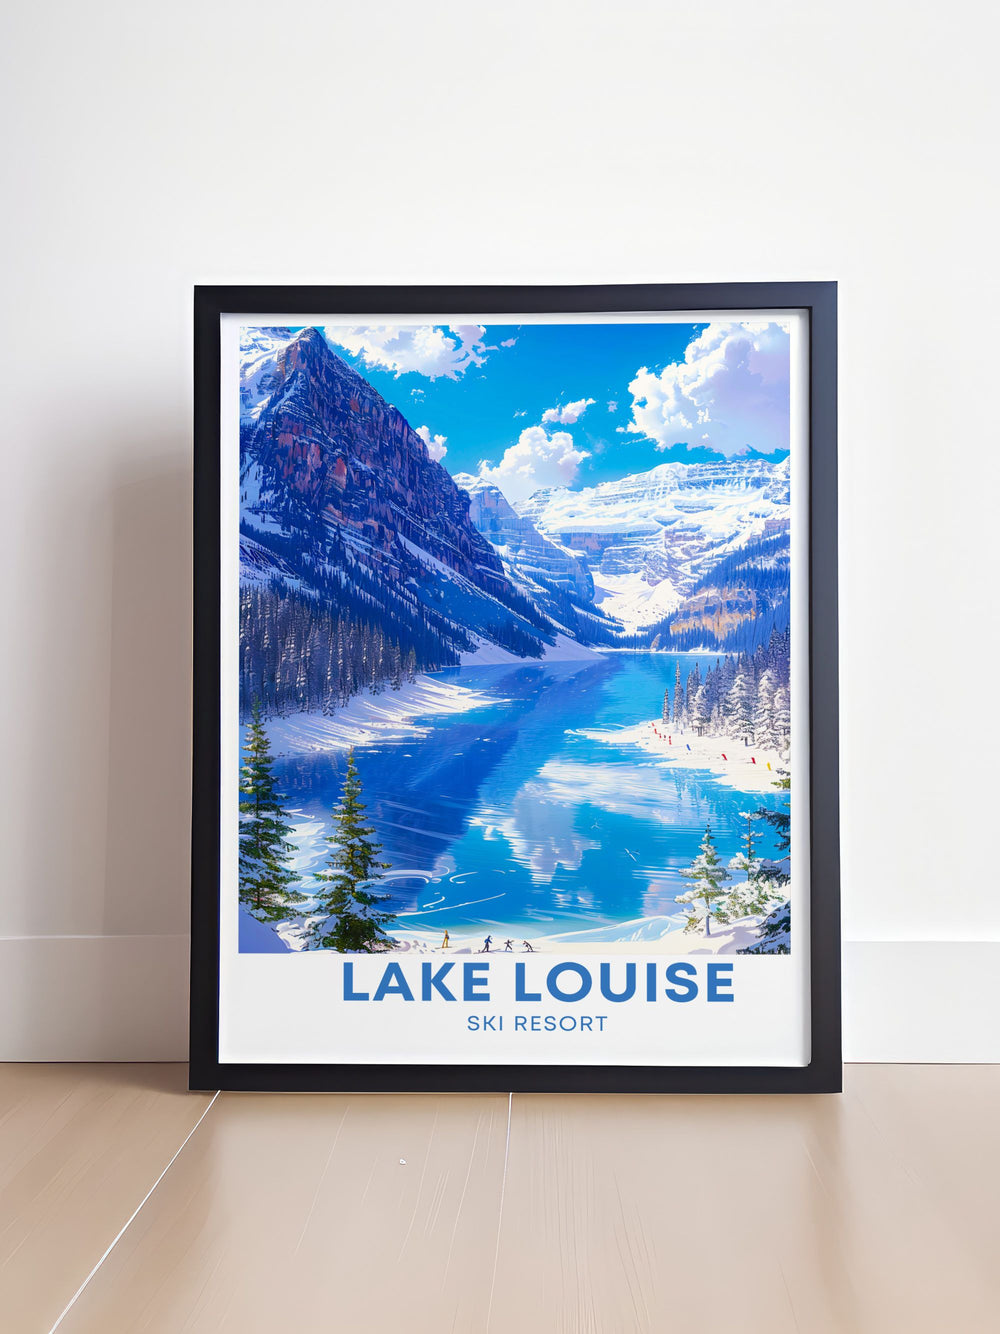 This art print features Lake Louise Ski Resort, highlighting the stunning landscapes and well groomed trails, perfect for ski enthusiasts and adventure seekers.